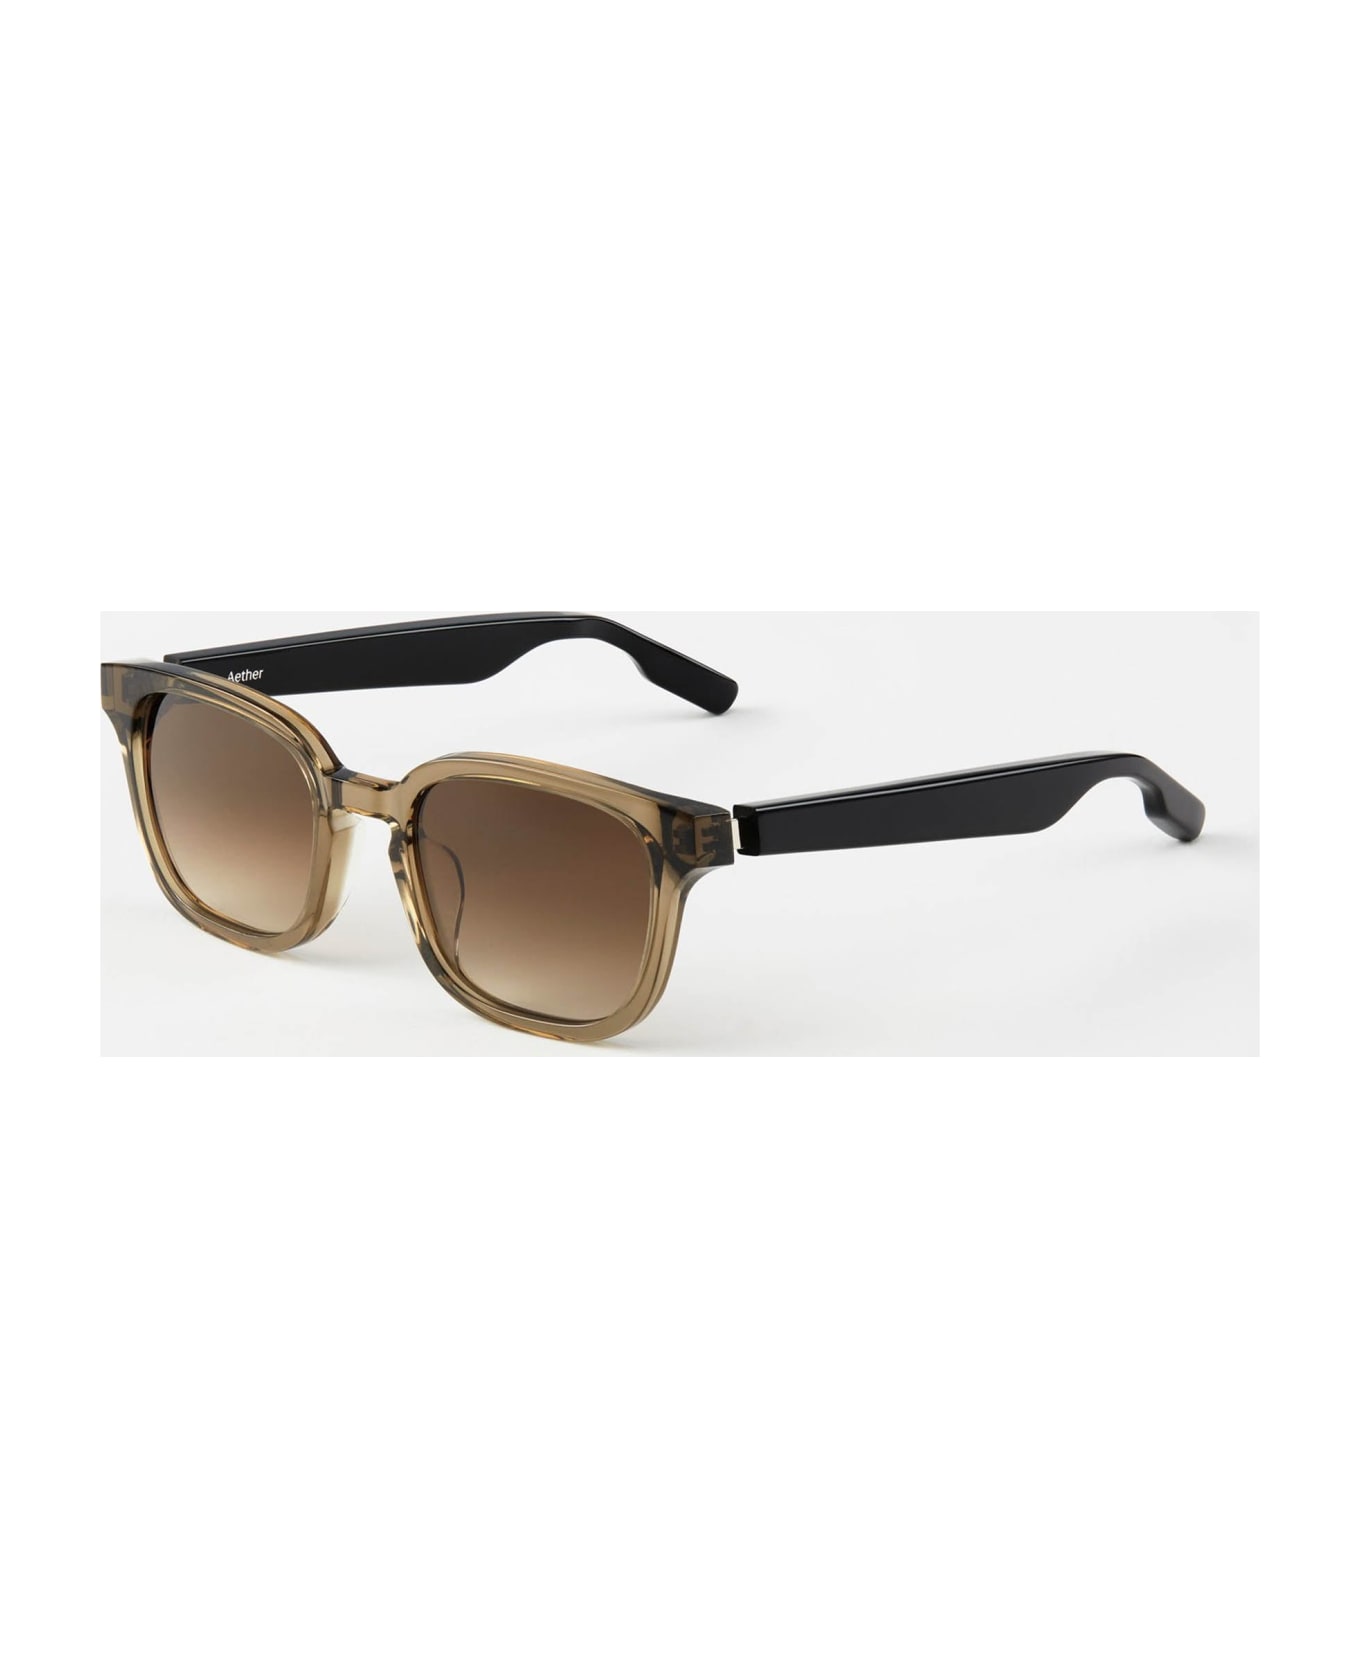 Aether Model S1 - Smoke Brown Sunglasses - brown